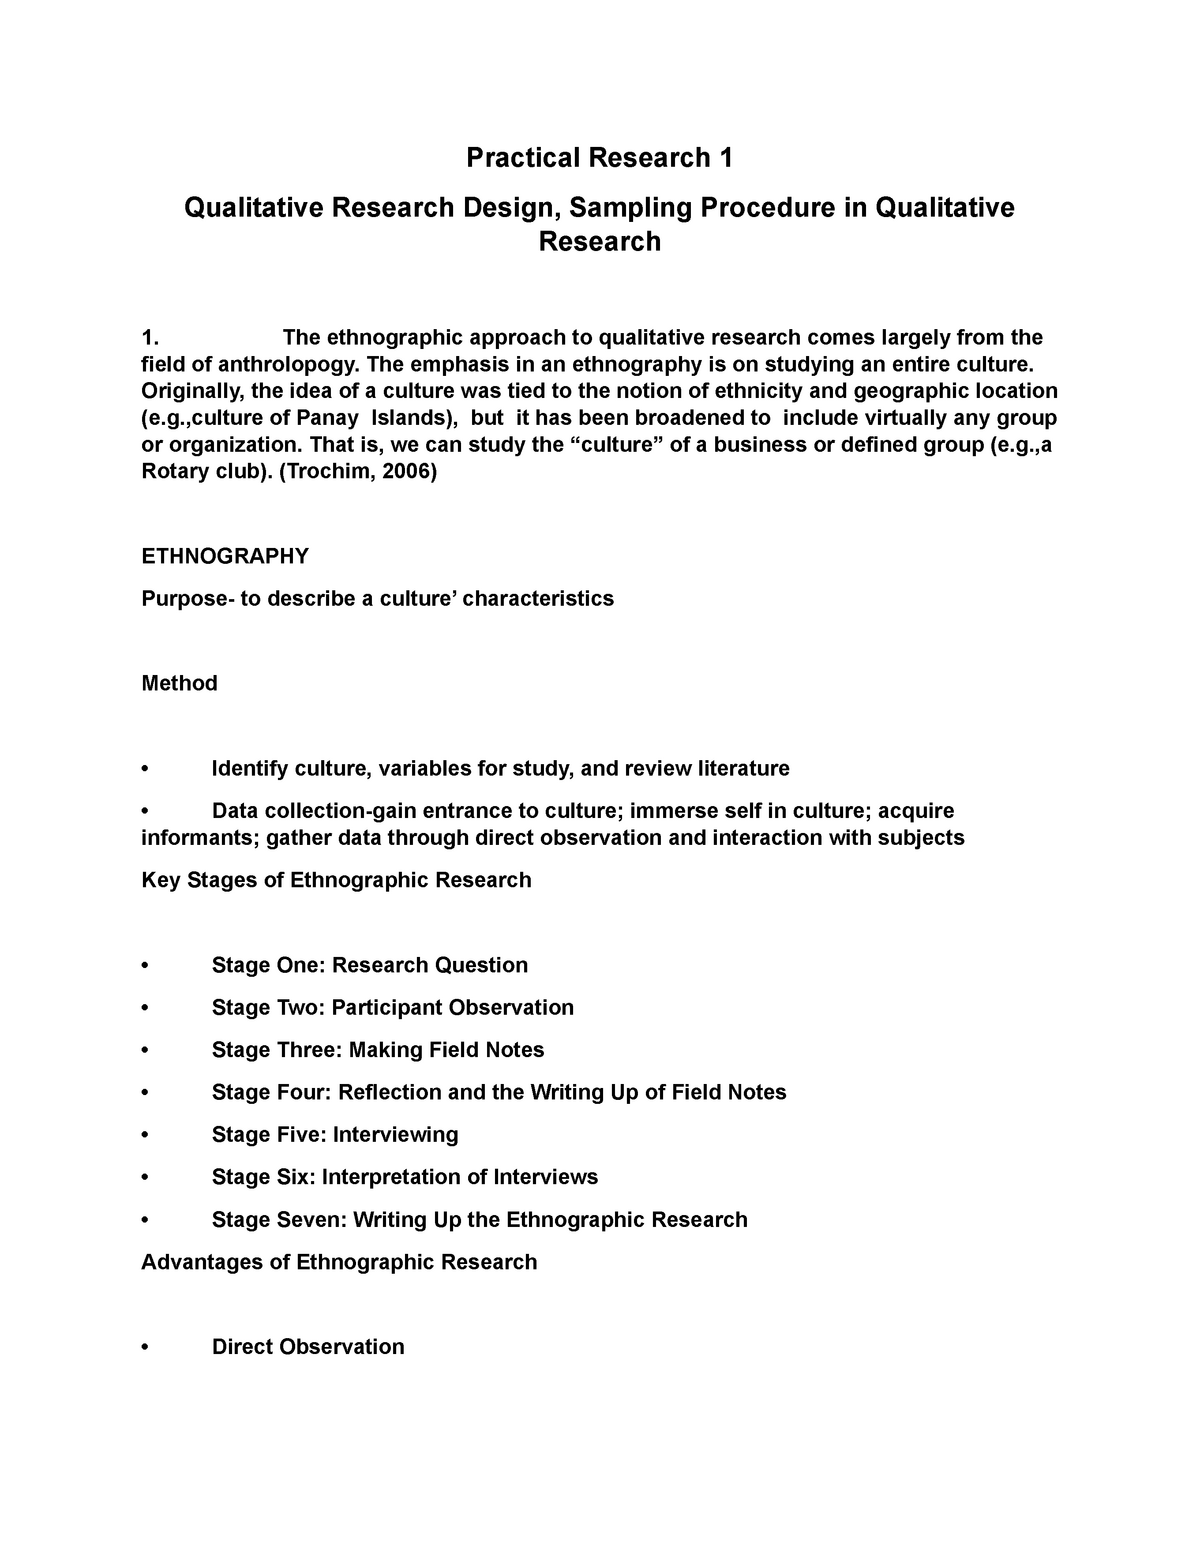 practical research 1 test questions and answers